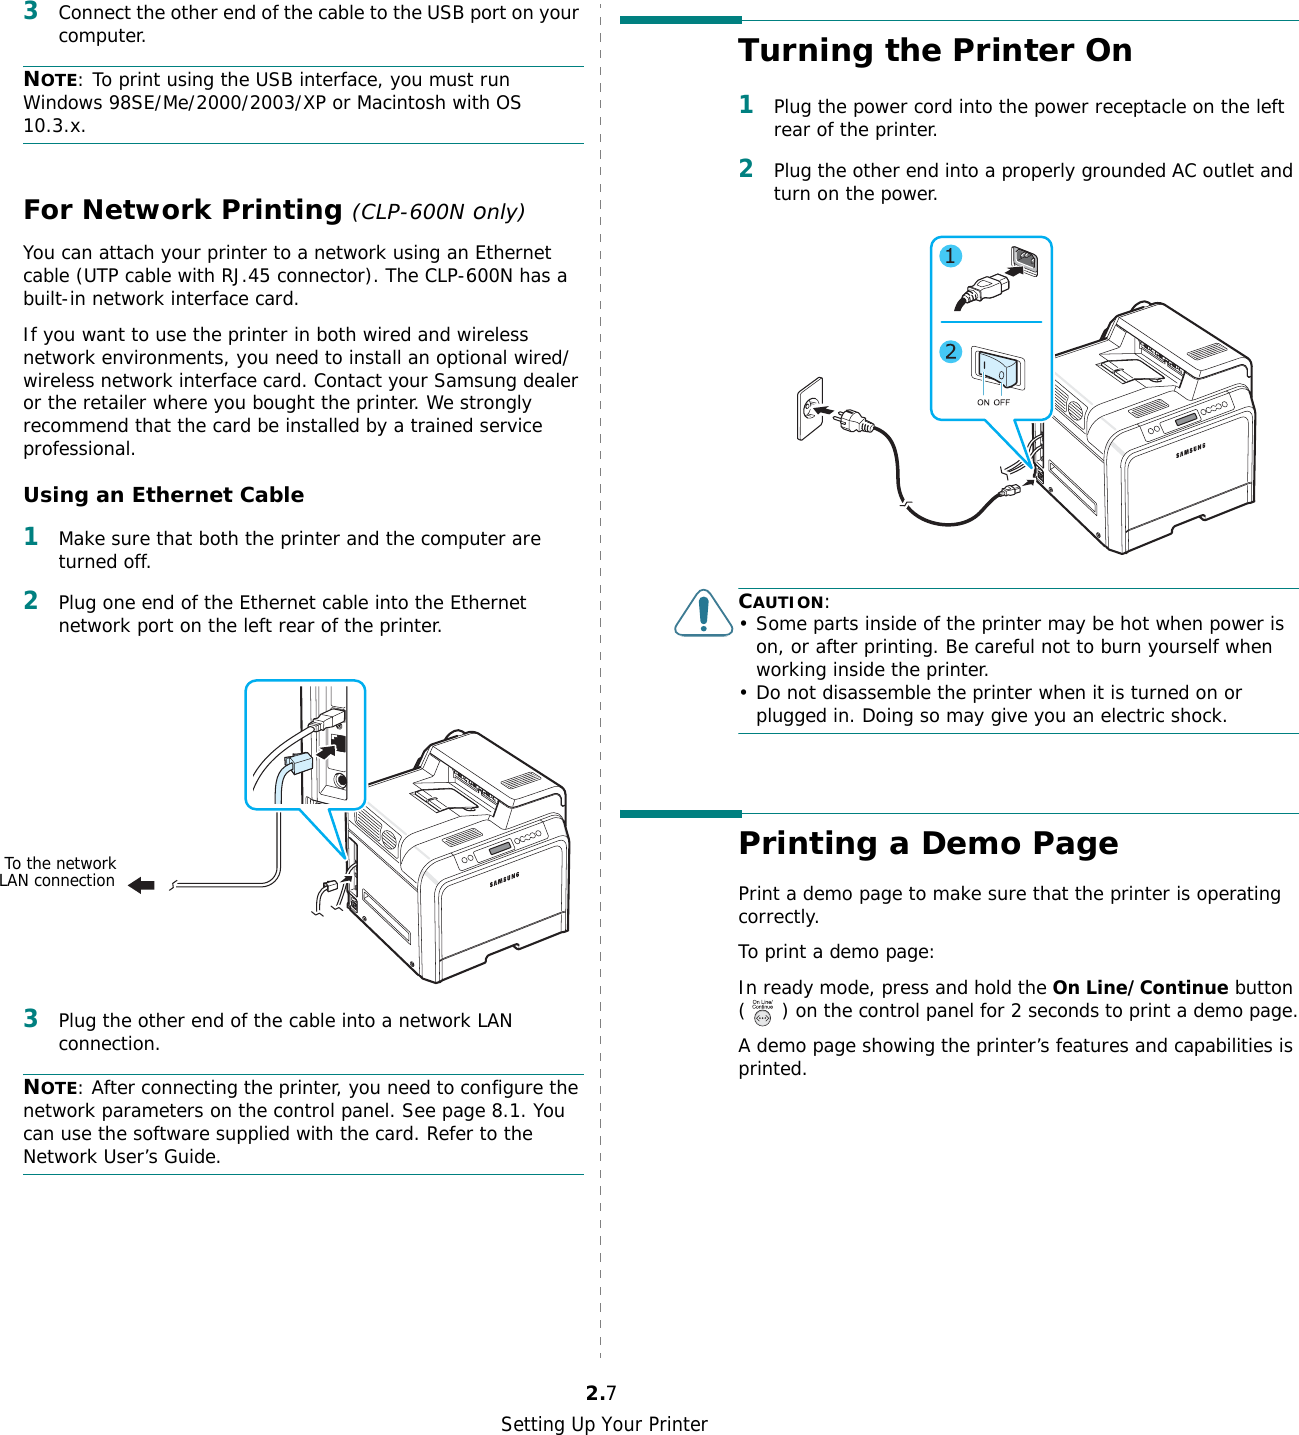 Setting Up Your Printer2.73Connect the other end of the cable to the USB port on your computer. NOTE: To print using the USB interface, you must run Windows 98SE/Me/2000/2003/XP or Macintosh with OS 10.3.x.For Network Printing (CLP-600N only)You can attach your printer to a network using an Ethernet cable (UTP cable with RJ.45 connector). The CLP-600N has a built-in network interface card.If you want to use the printer in both wired and wireless network environments, you need to install an optional wired/wireless network interface card. Contact your Samsung dealer or the retailer where you bought the printer. We strongly recommend that the card be installed by a trained service professional.Using an Ethernet Cable1Make sure that both the printer and the computer are turned off.2Plug one end of the Ethernet cable into the Ethernet network port on the left rear of the printer.3Plug the other end of the cable into a network LAN connection.NOTE: After connecting the printer, you need to configure the network parameters on the control panel. See page 8.1. You can use the software supplied with the card. Refer to the Network User’s Guide. To the networkLAN connectionTurning the Printer On1Plug the power cord into the power receptacle on the left rear of the printer. 2Plug the other end into a properly grounded AC outlet and turn on the power. CAUTION:• Some parts inside of the printer may be hot when power is on, or after printing. Be careful not to burn yourself when working inside the printer.• Do not disassemble the printer when it is turned on or plugged in. Doing so may give you an electric shock.Printing a Demo PagePrint a demo page to make sure that the printer is operating correctly.To print a demo page:In ready mode, press and hold the On Line/Continue button ( ) on the control panel for 2 seconds to print a demo page.A demo page showing the printer’s features and capabilities is printed.